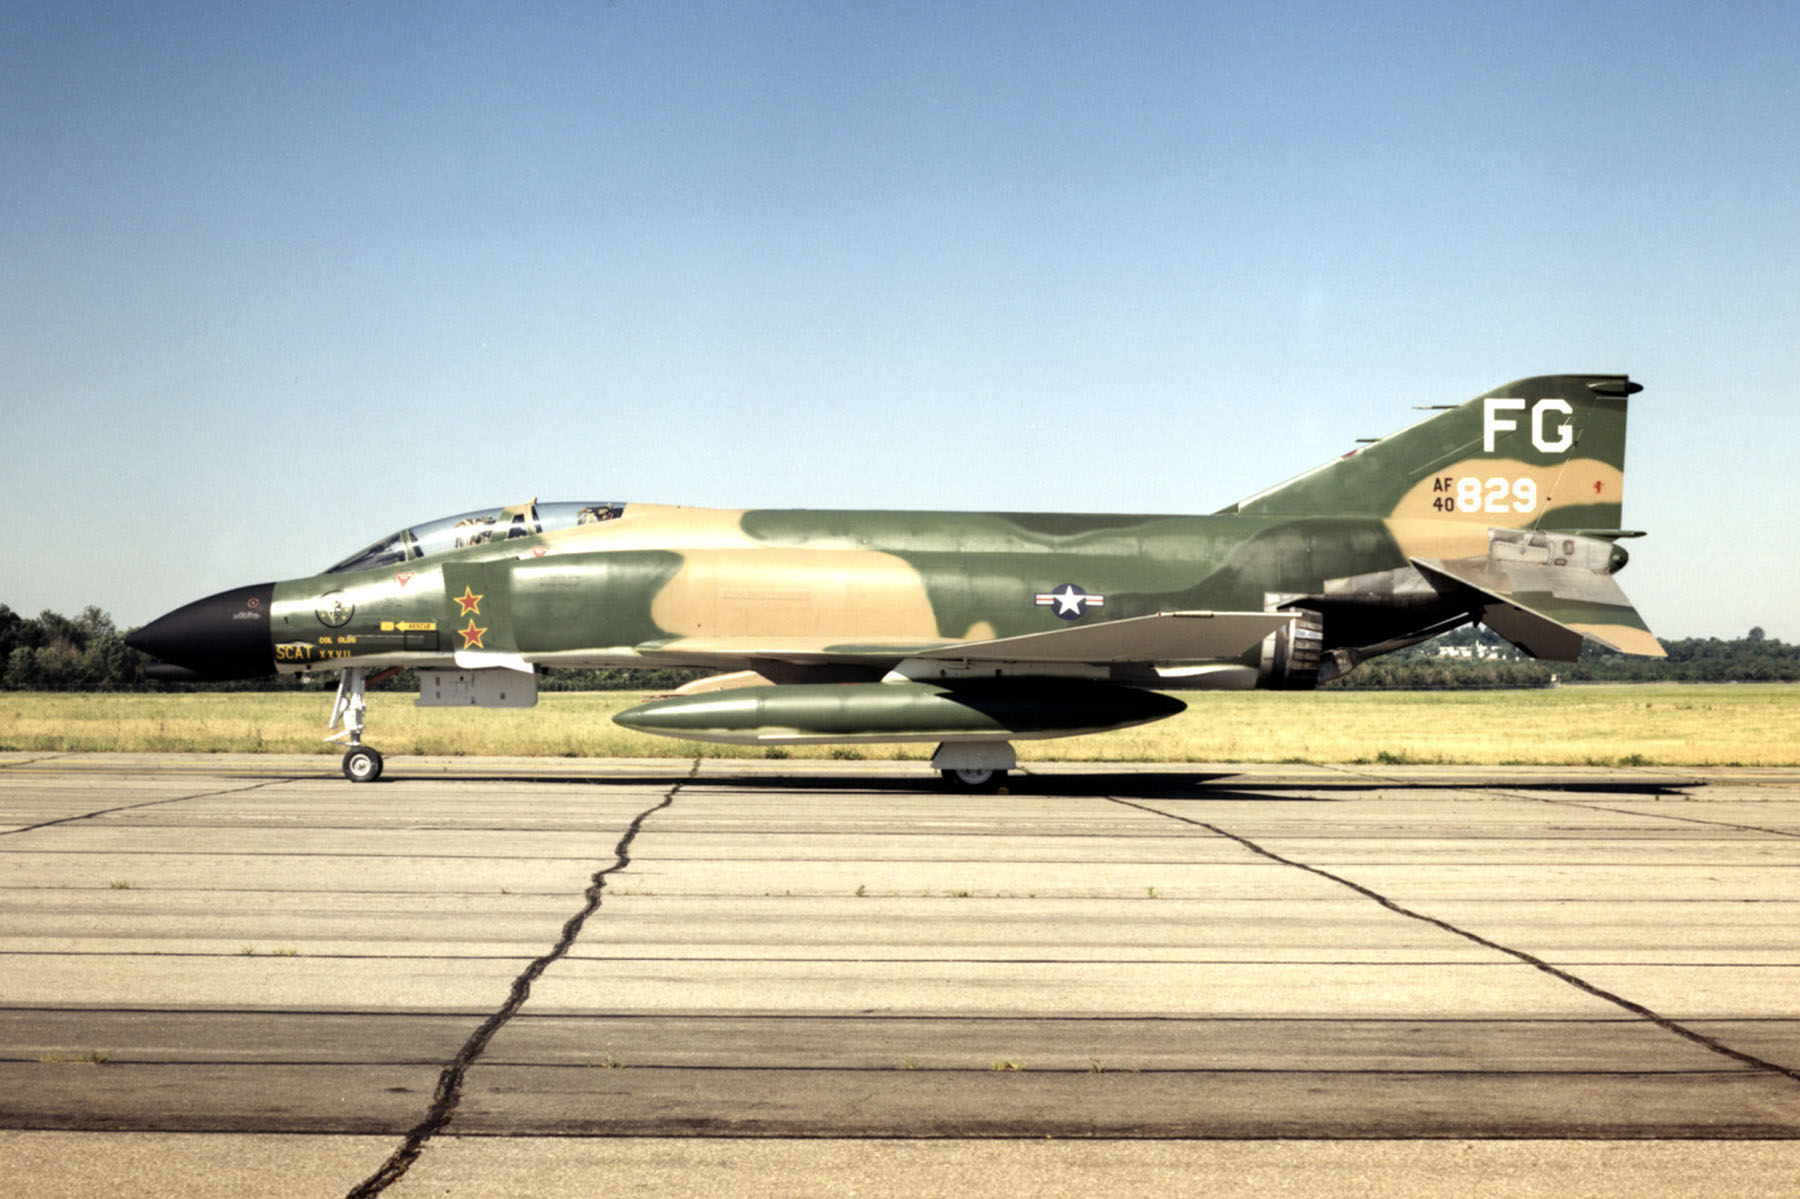 brigadier general Robin Olds' McDonnell F-4C-24-MC Phantom II, SCAT XXVII, at the National Museum of the United States Air Force, Wright-Patterson AFB, Ohio. (U.S. Air Force)